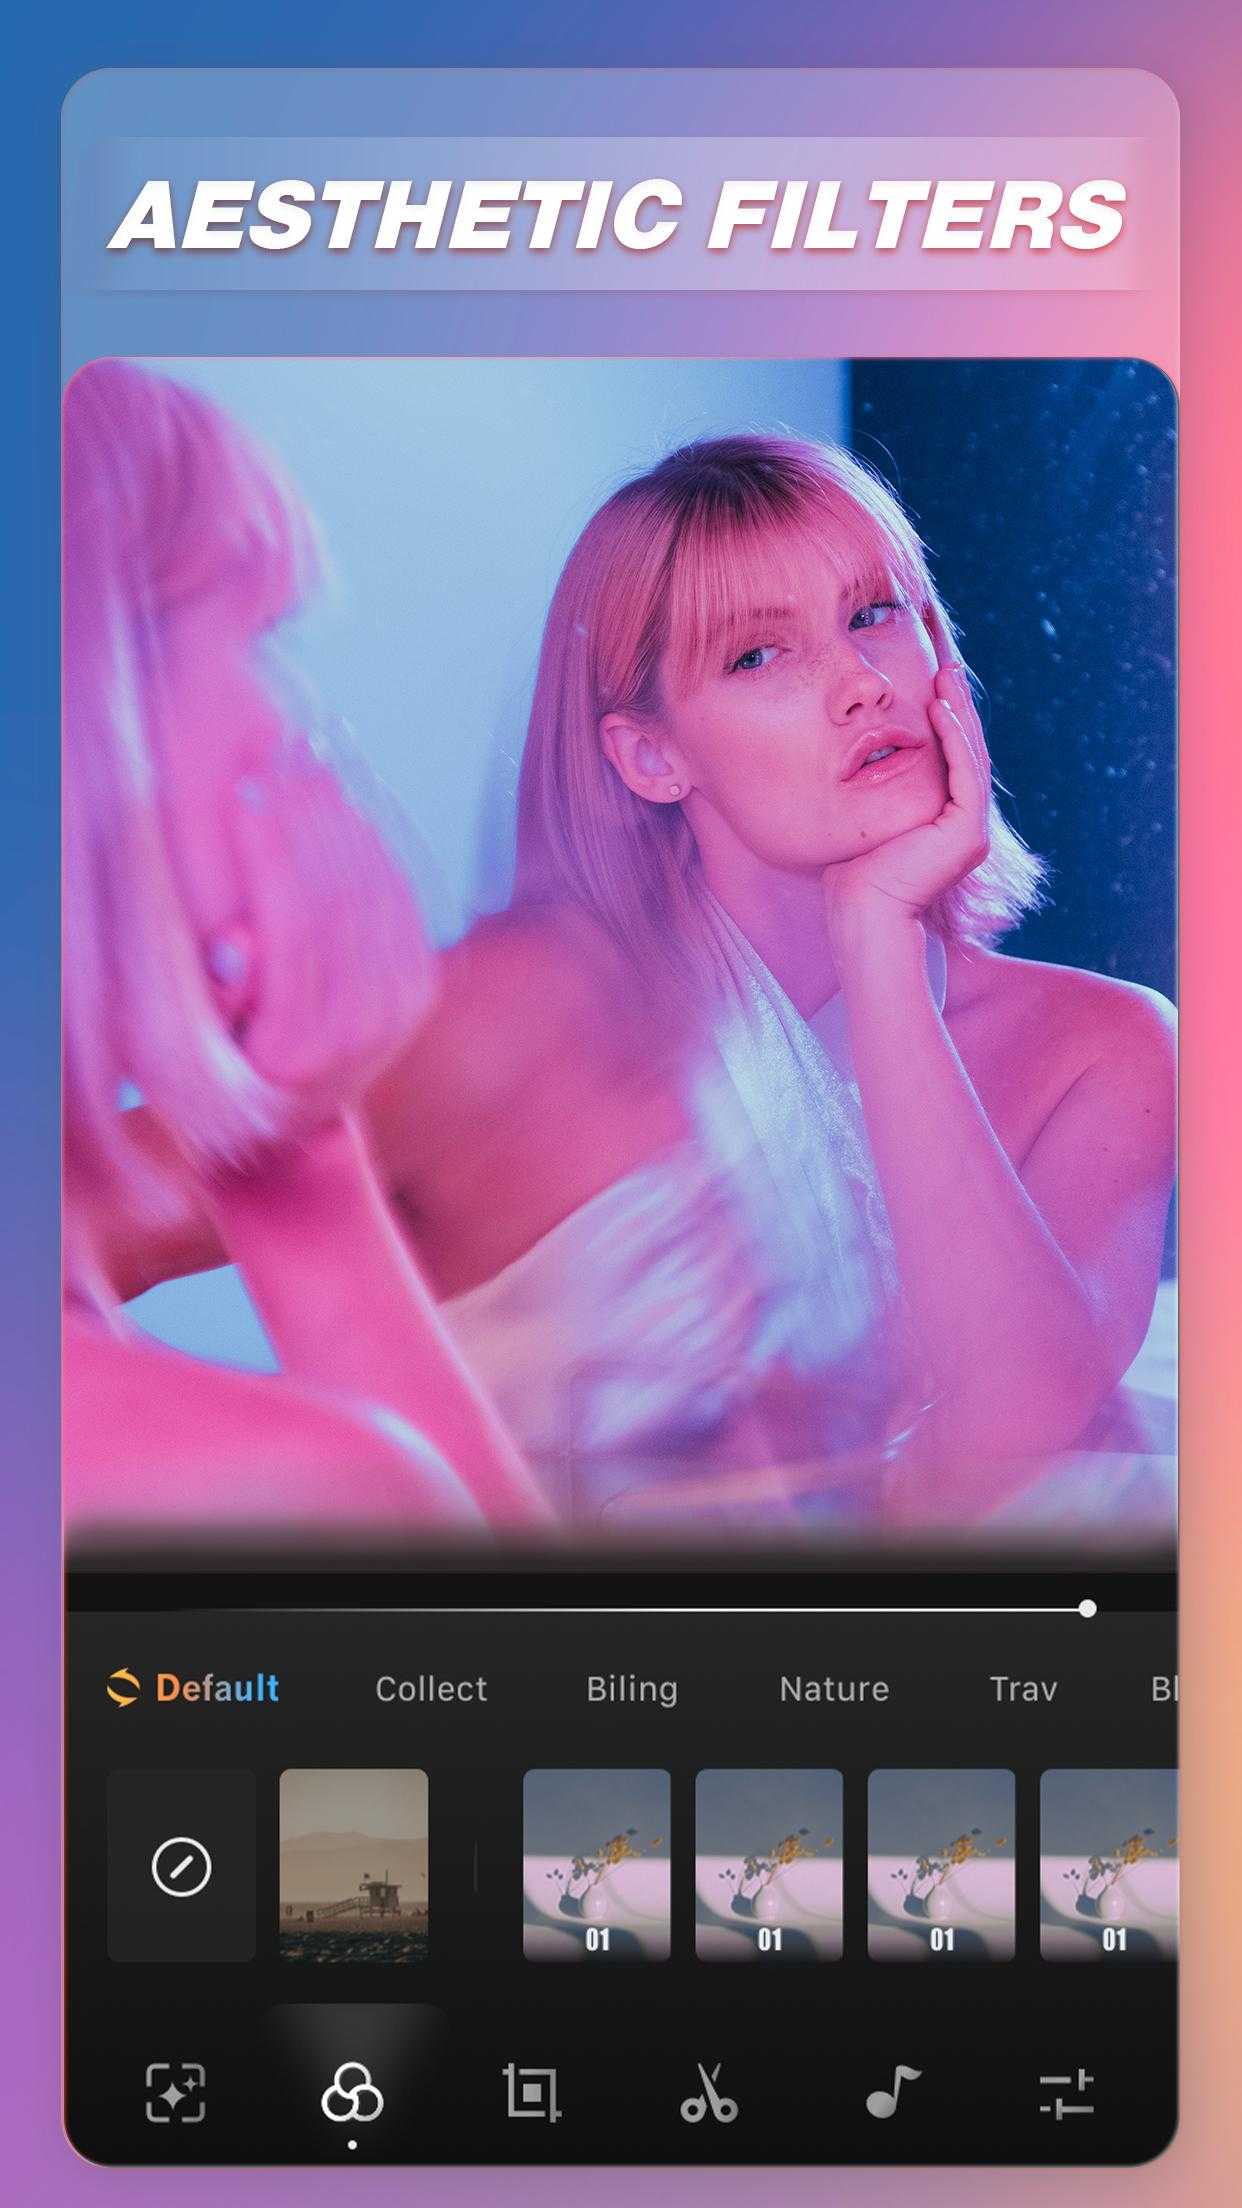 Video Effects & Aesthetic Filter Editor – Fito.ly v3.3.132 (Mod) (Premium) APK